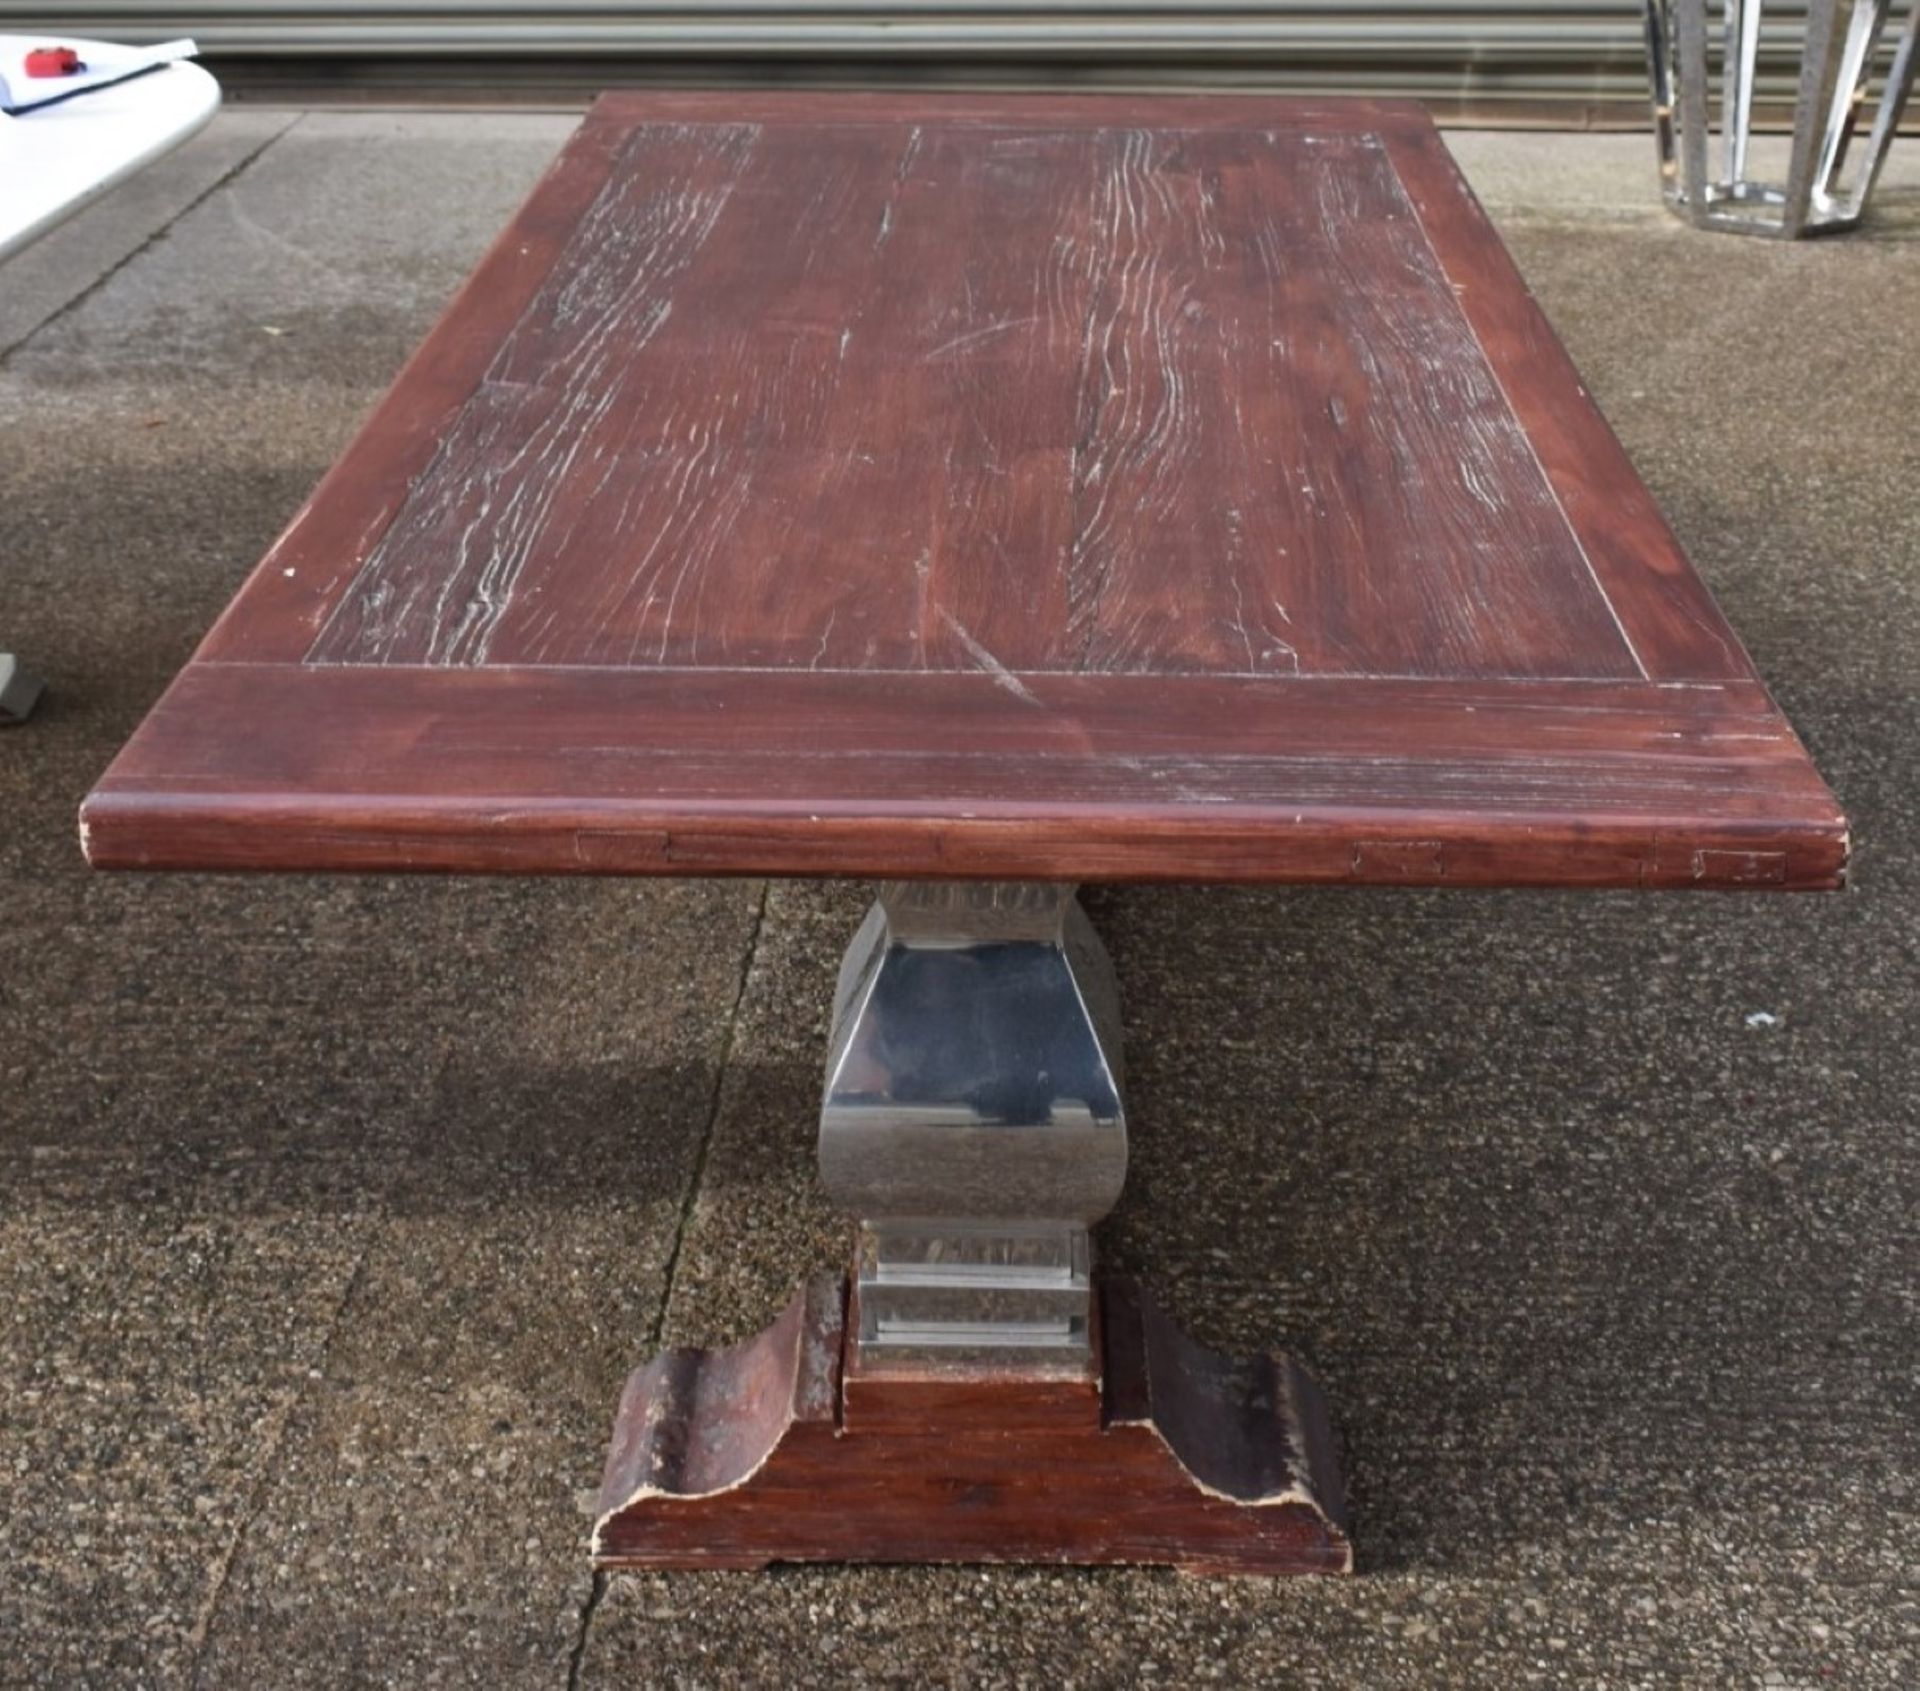 1 x Commercial 2-Metre Rustic Timber Banquet Dining Table - Image 2 of 9